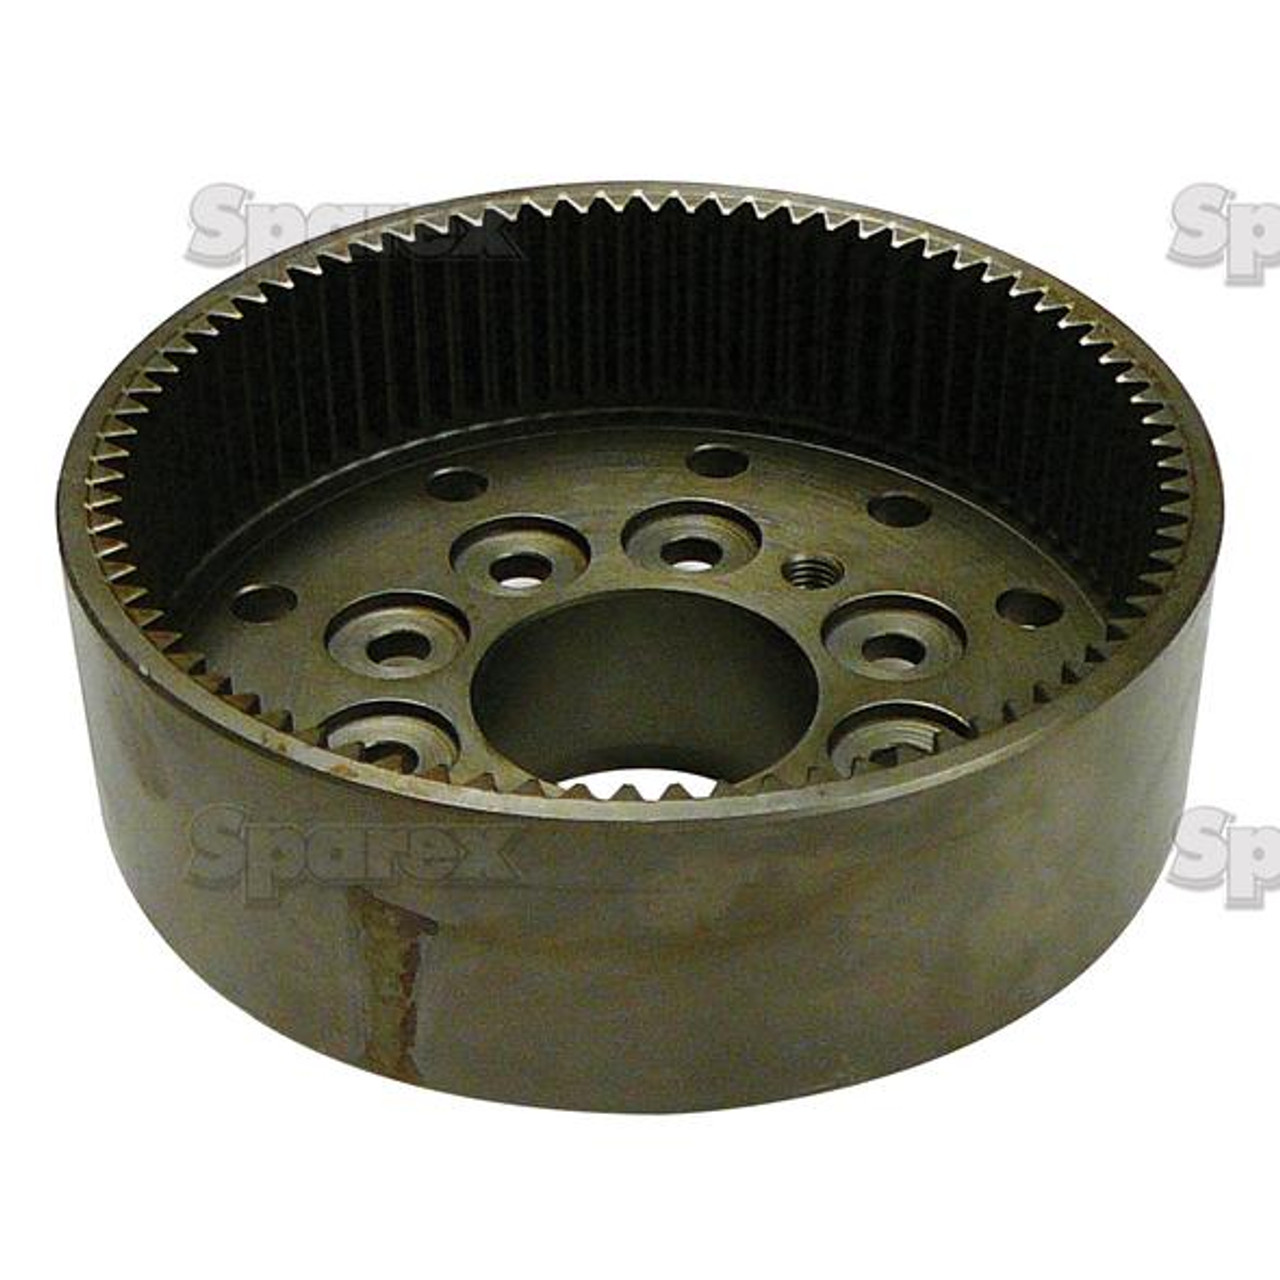 Tractor  RING GEAR, S-L101724 Part Number S67428